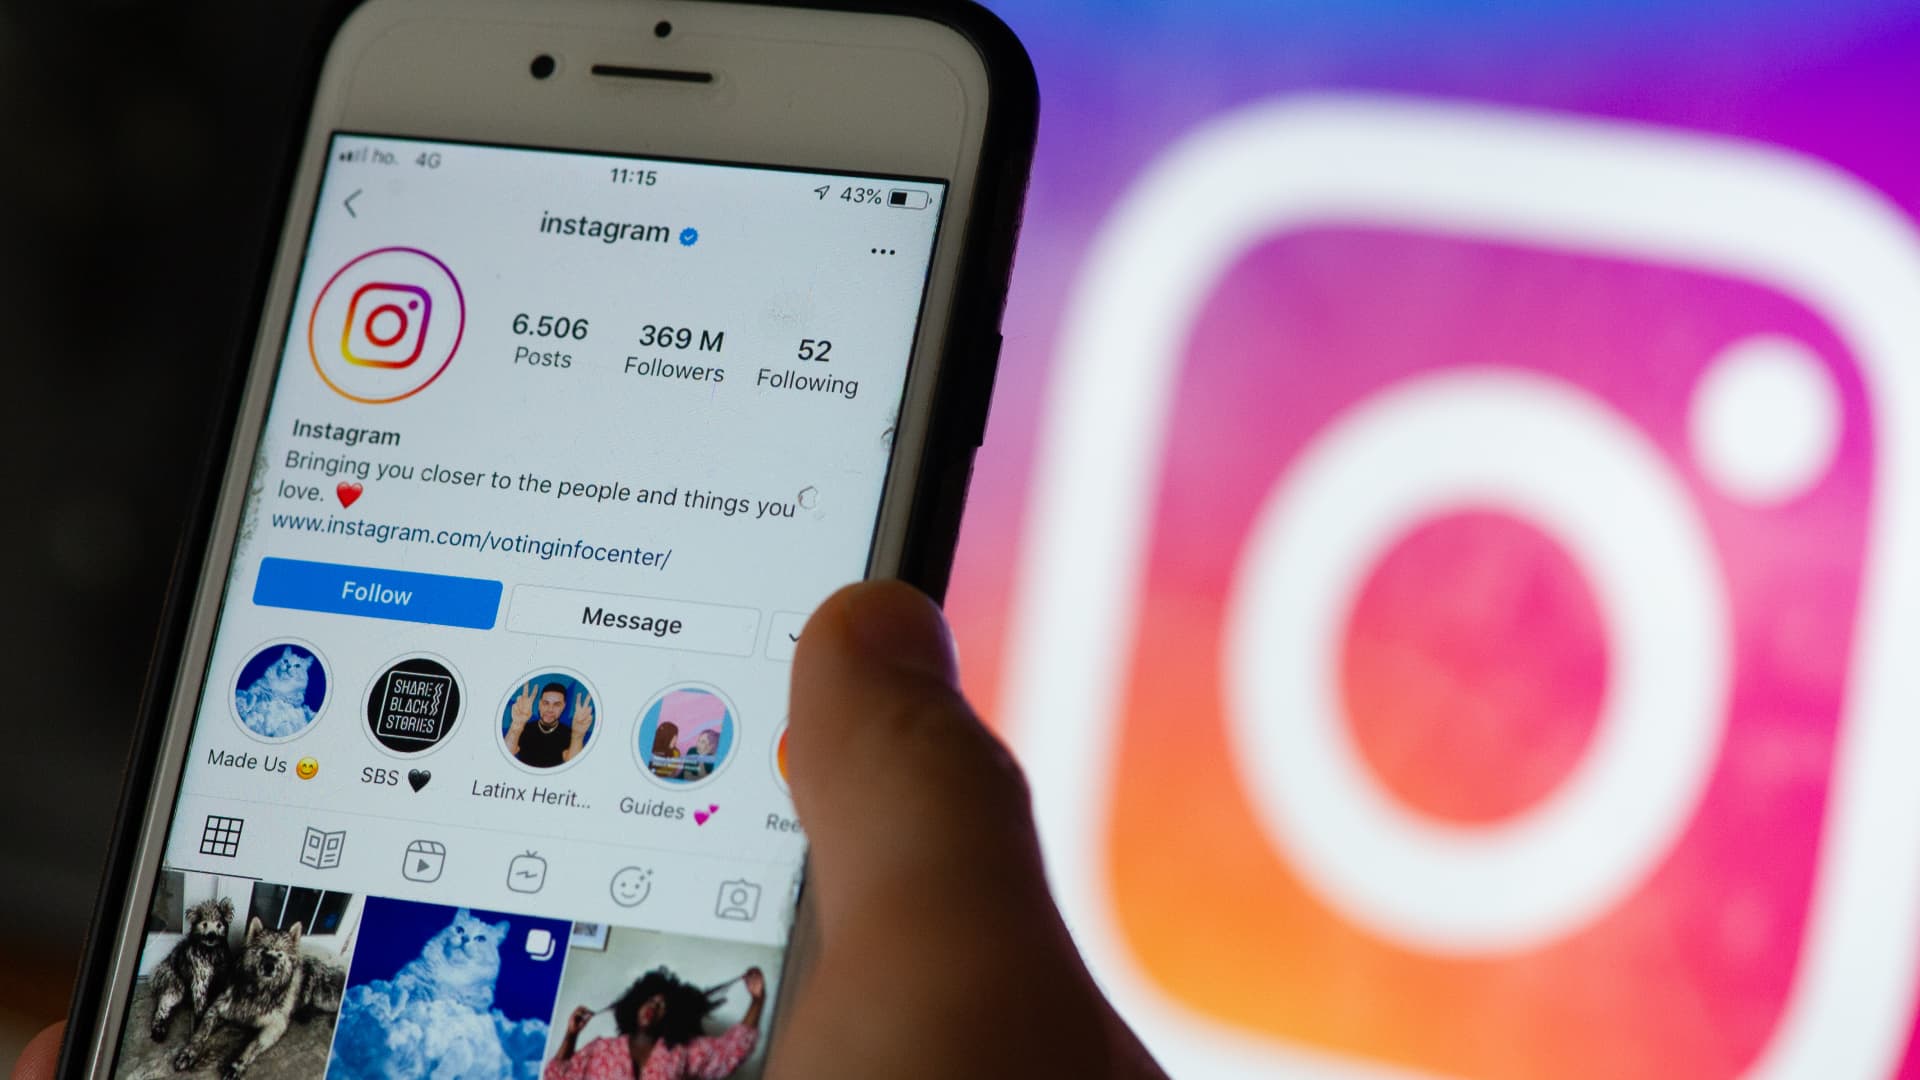 Instagram testing new ways for teens to verify they’re 18 years old, including video selfies